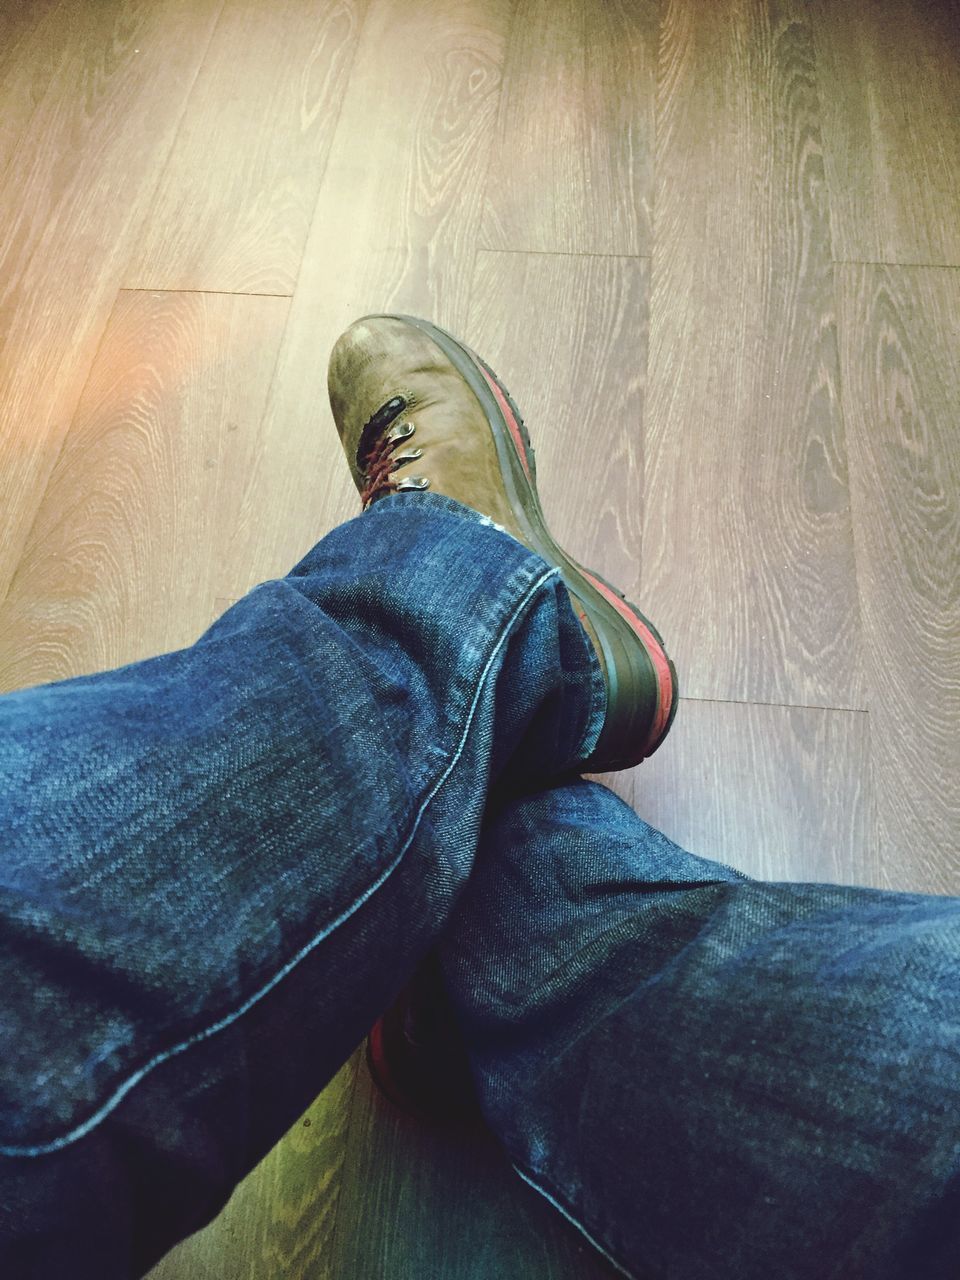 LOW SECTION OF MAN WEARING SHOES ON FLOOR